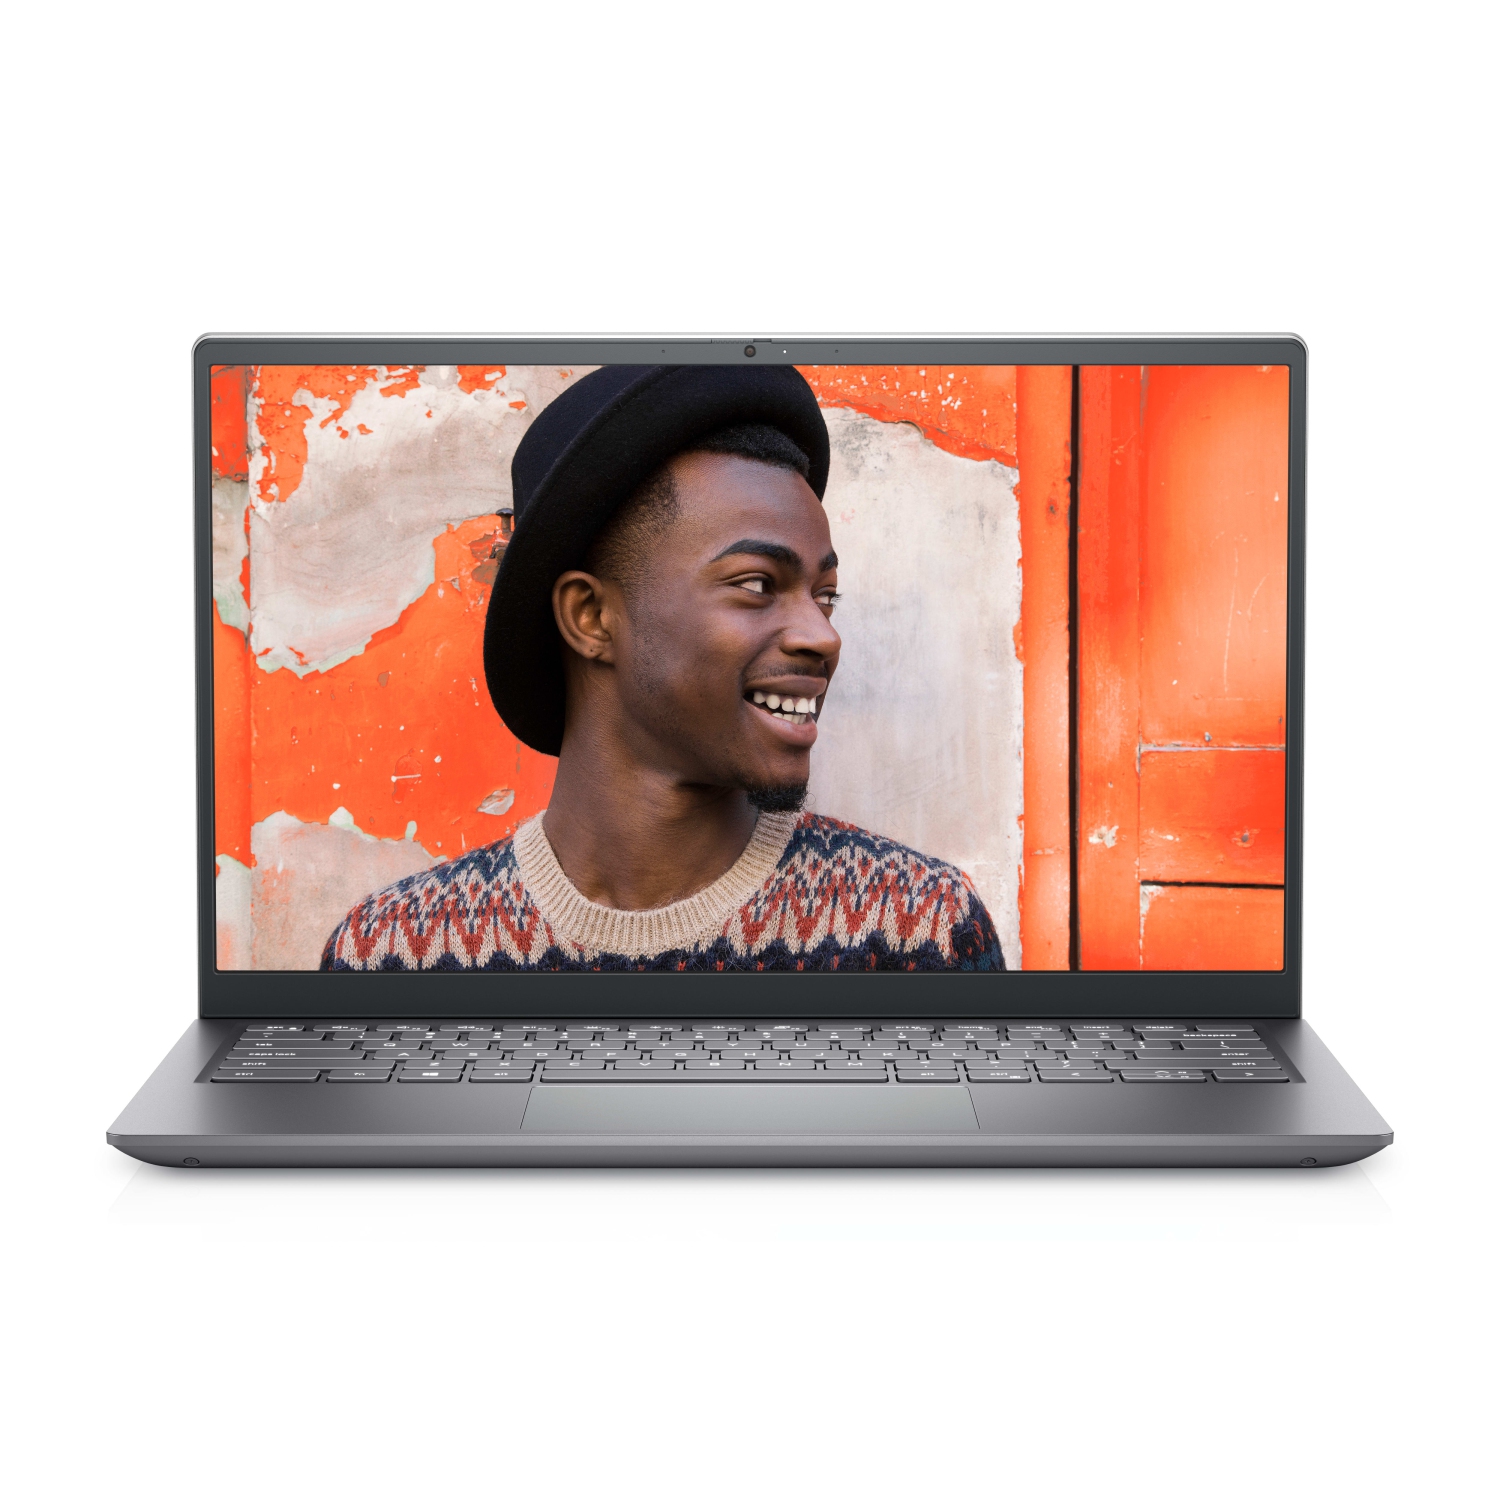 Refurbished (Excellent) – Dell Inspiron 5410 Laptop (2021) | 14" FHD | Core i7 - 2TB SSD - 16GB RAM | 4 Cores @ 4.8 GHz - 11th Gen CPU